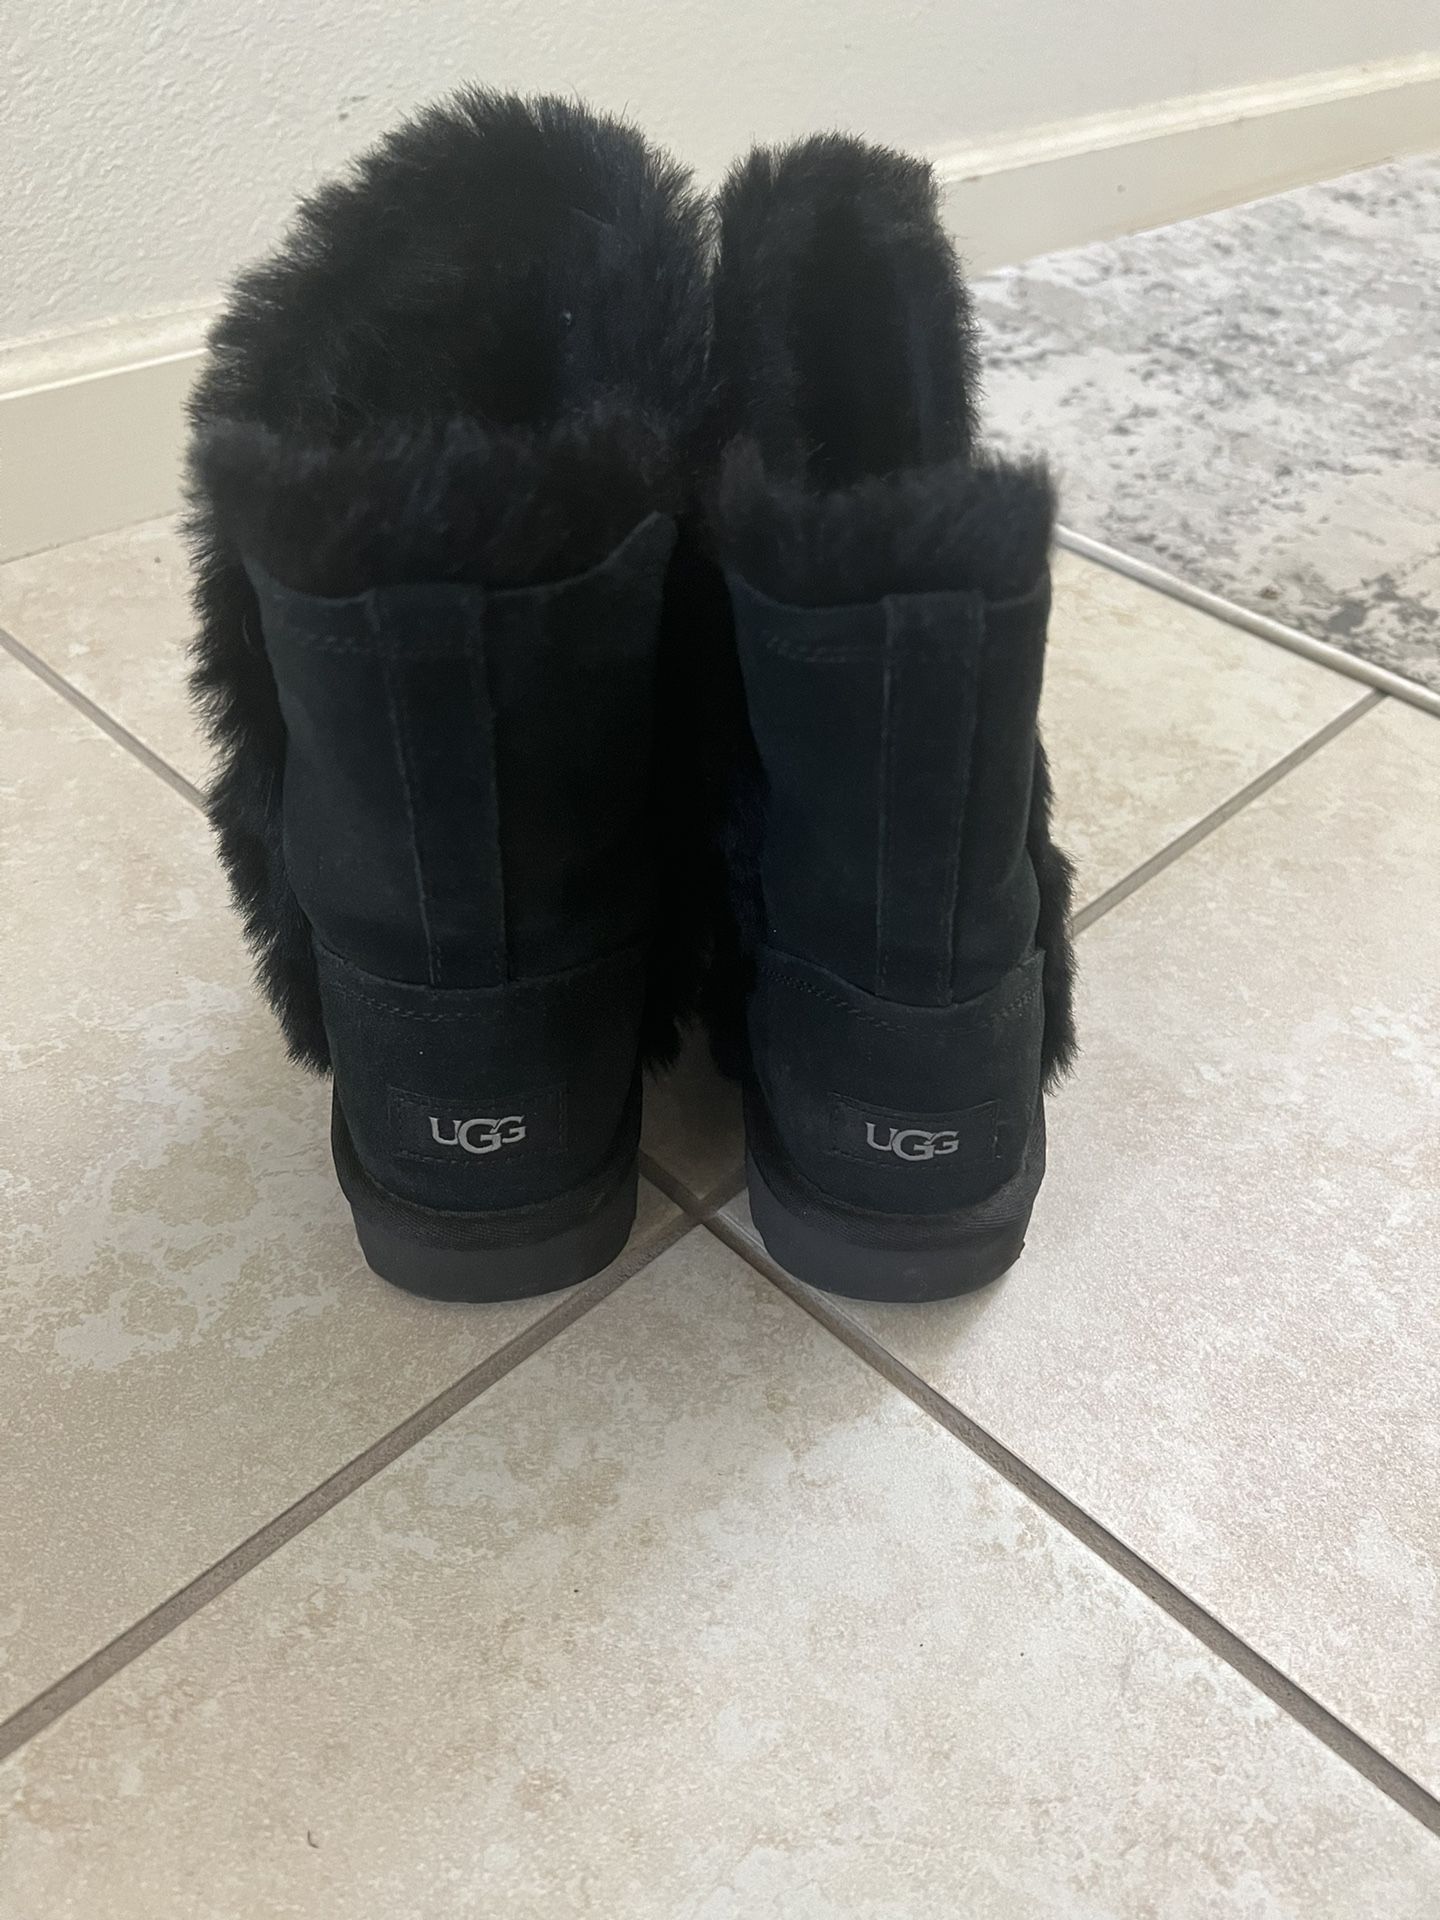 Authentic Ugg Boots